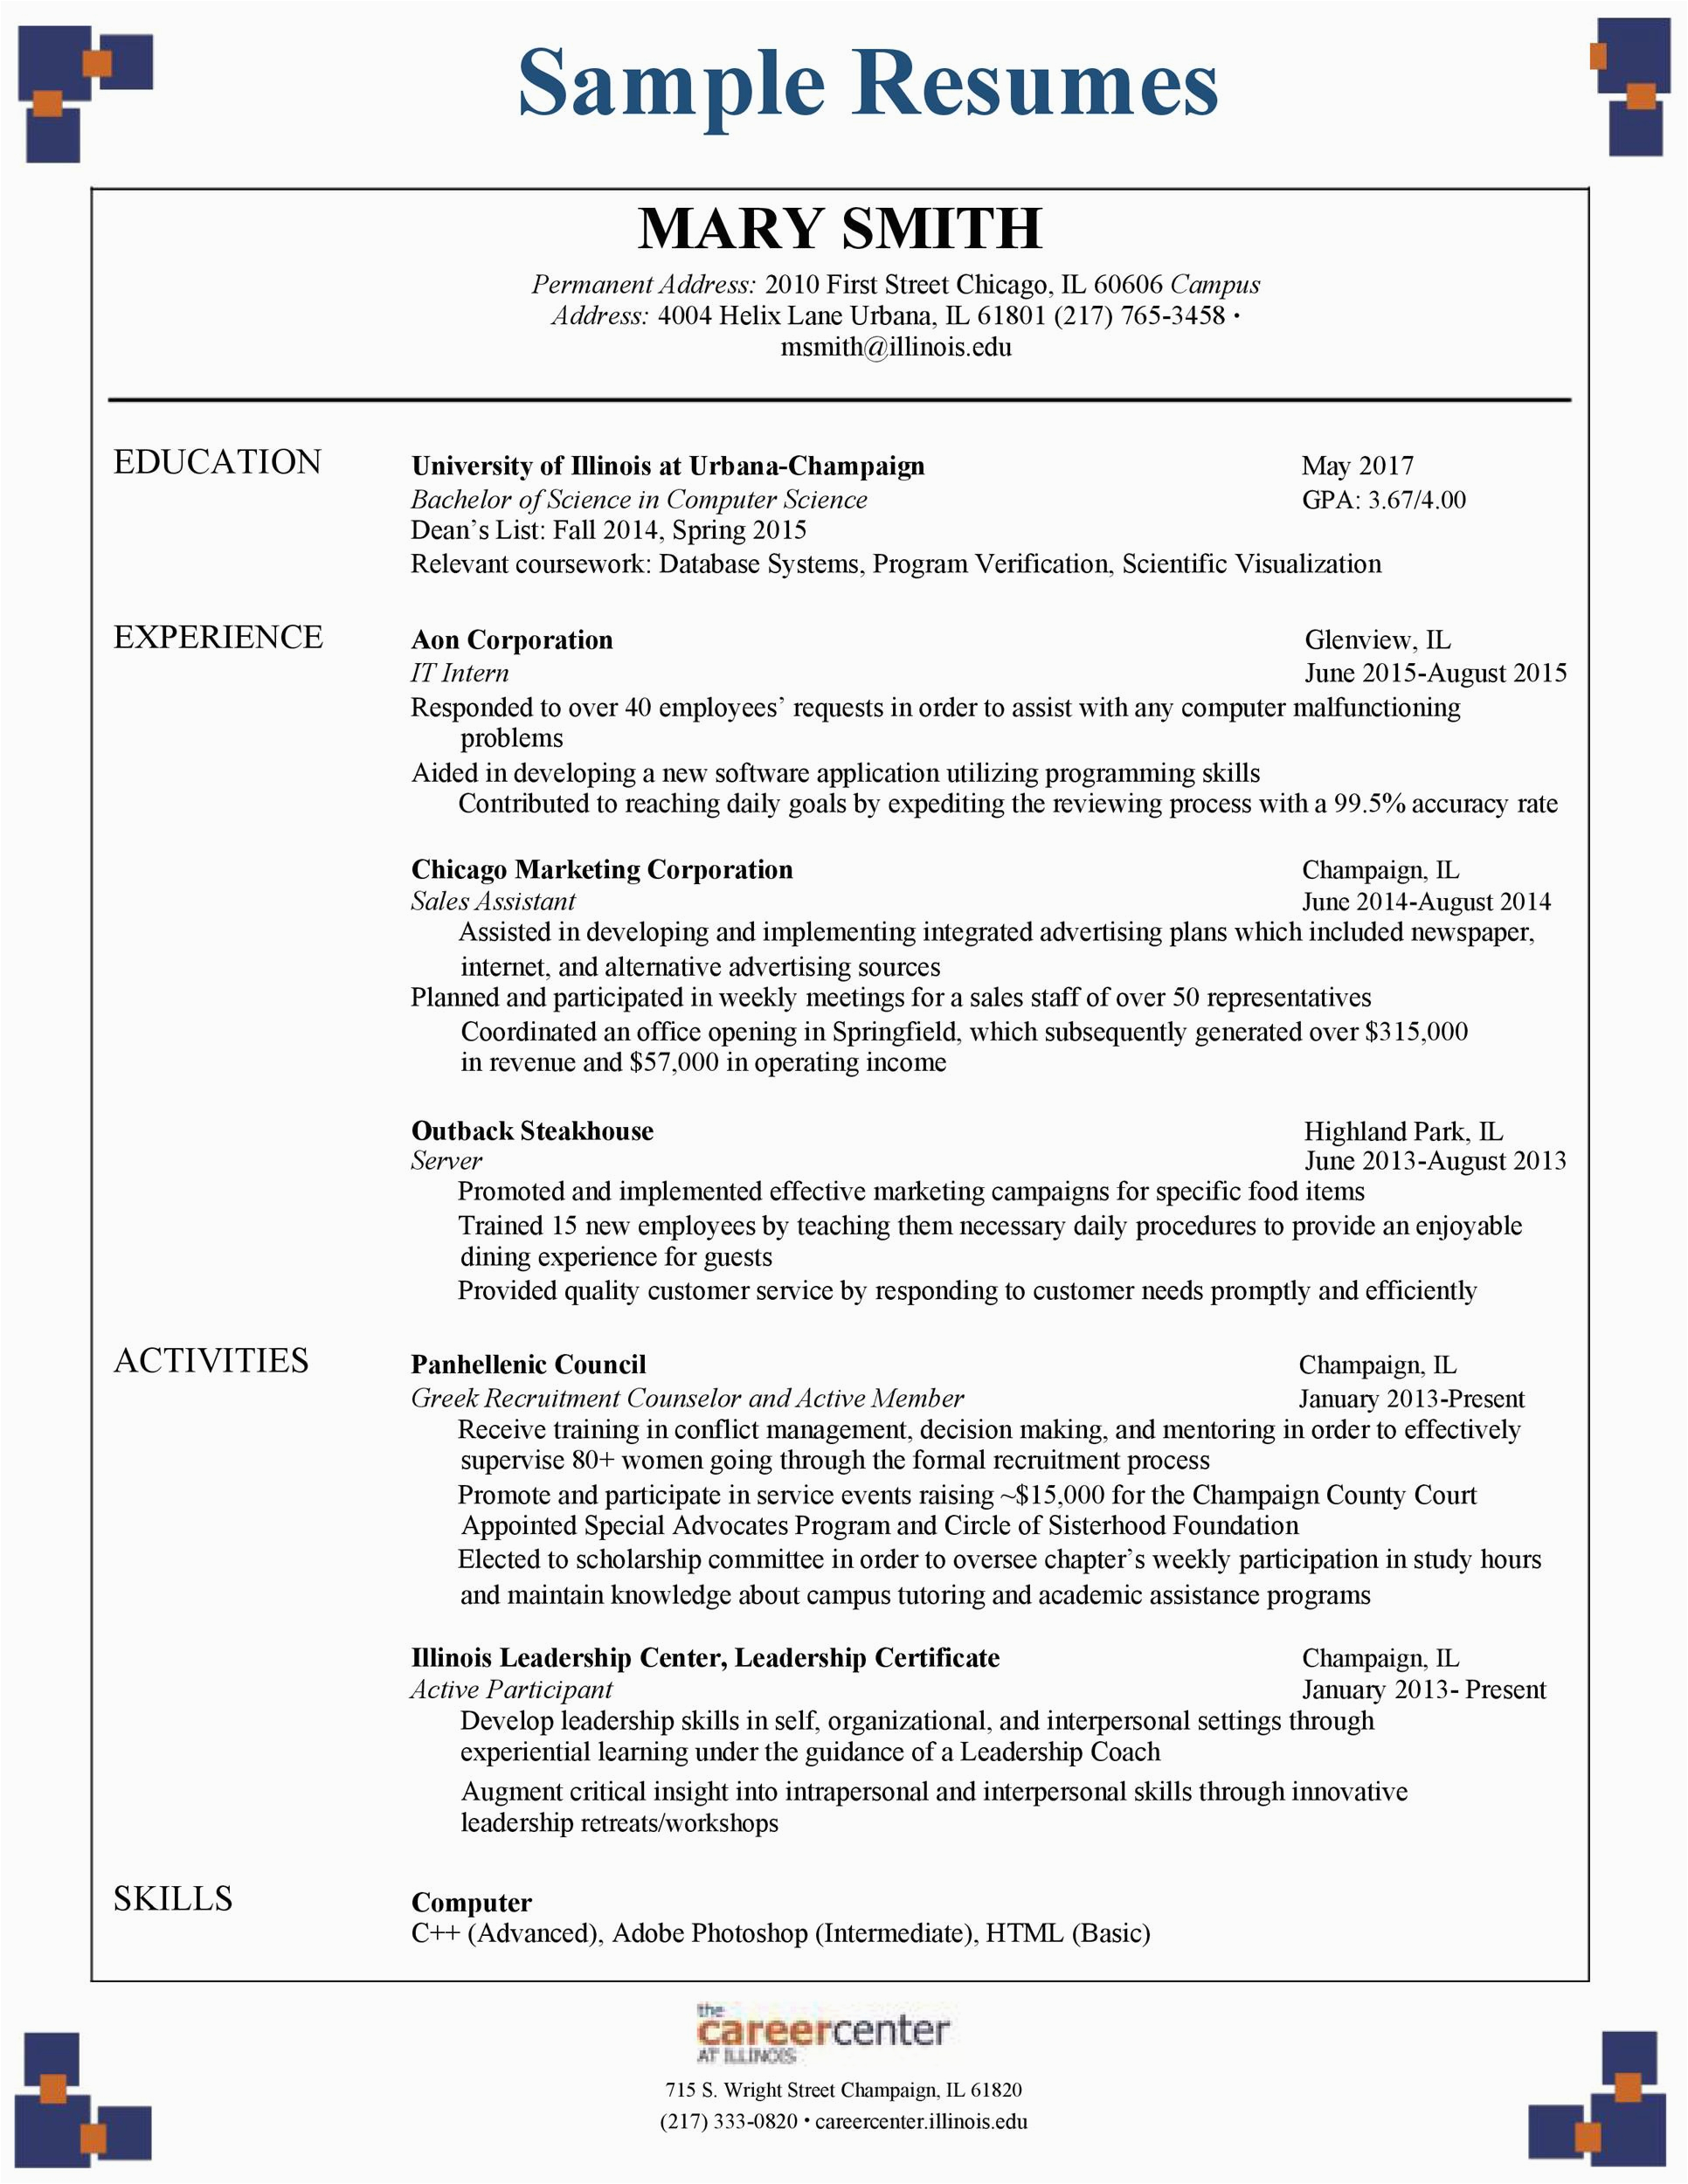 Academic Resume Template for College Applications College Application Resume Template Resume Templates for